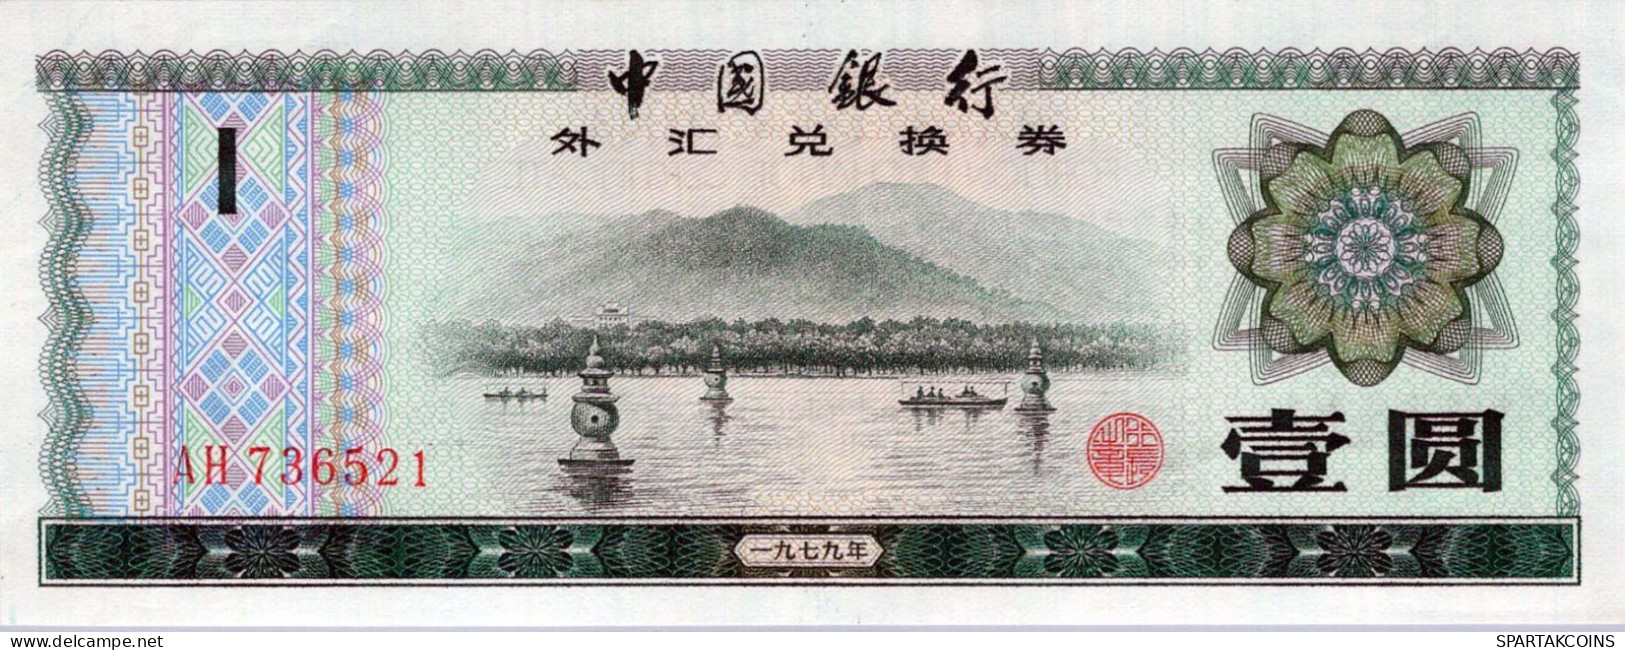 1 YUAN 1979 CHINESISCH Papiergeld Banknote #PJ501 - [11] Local Banknote Issues